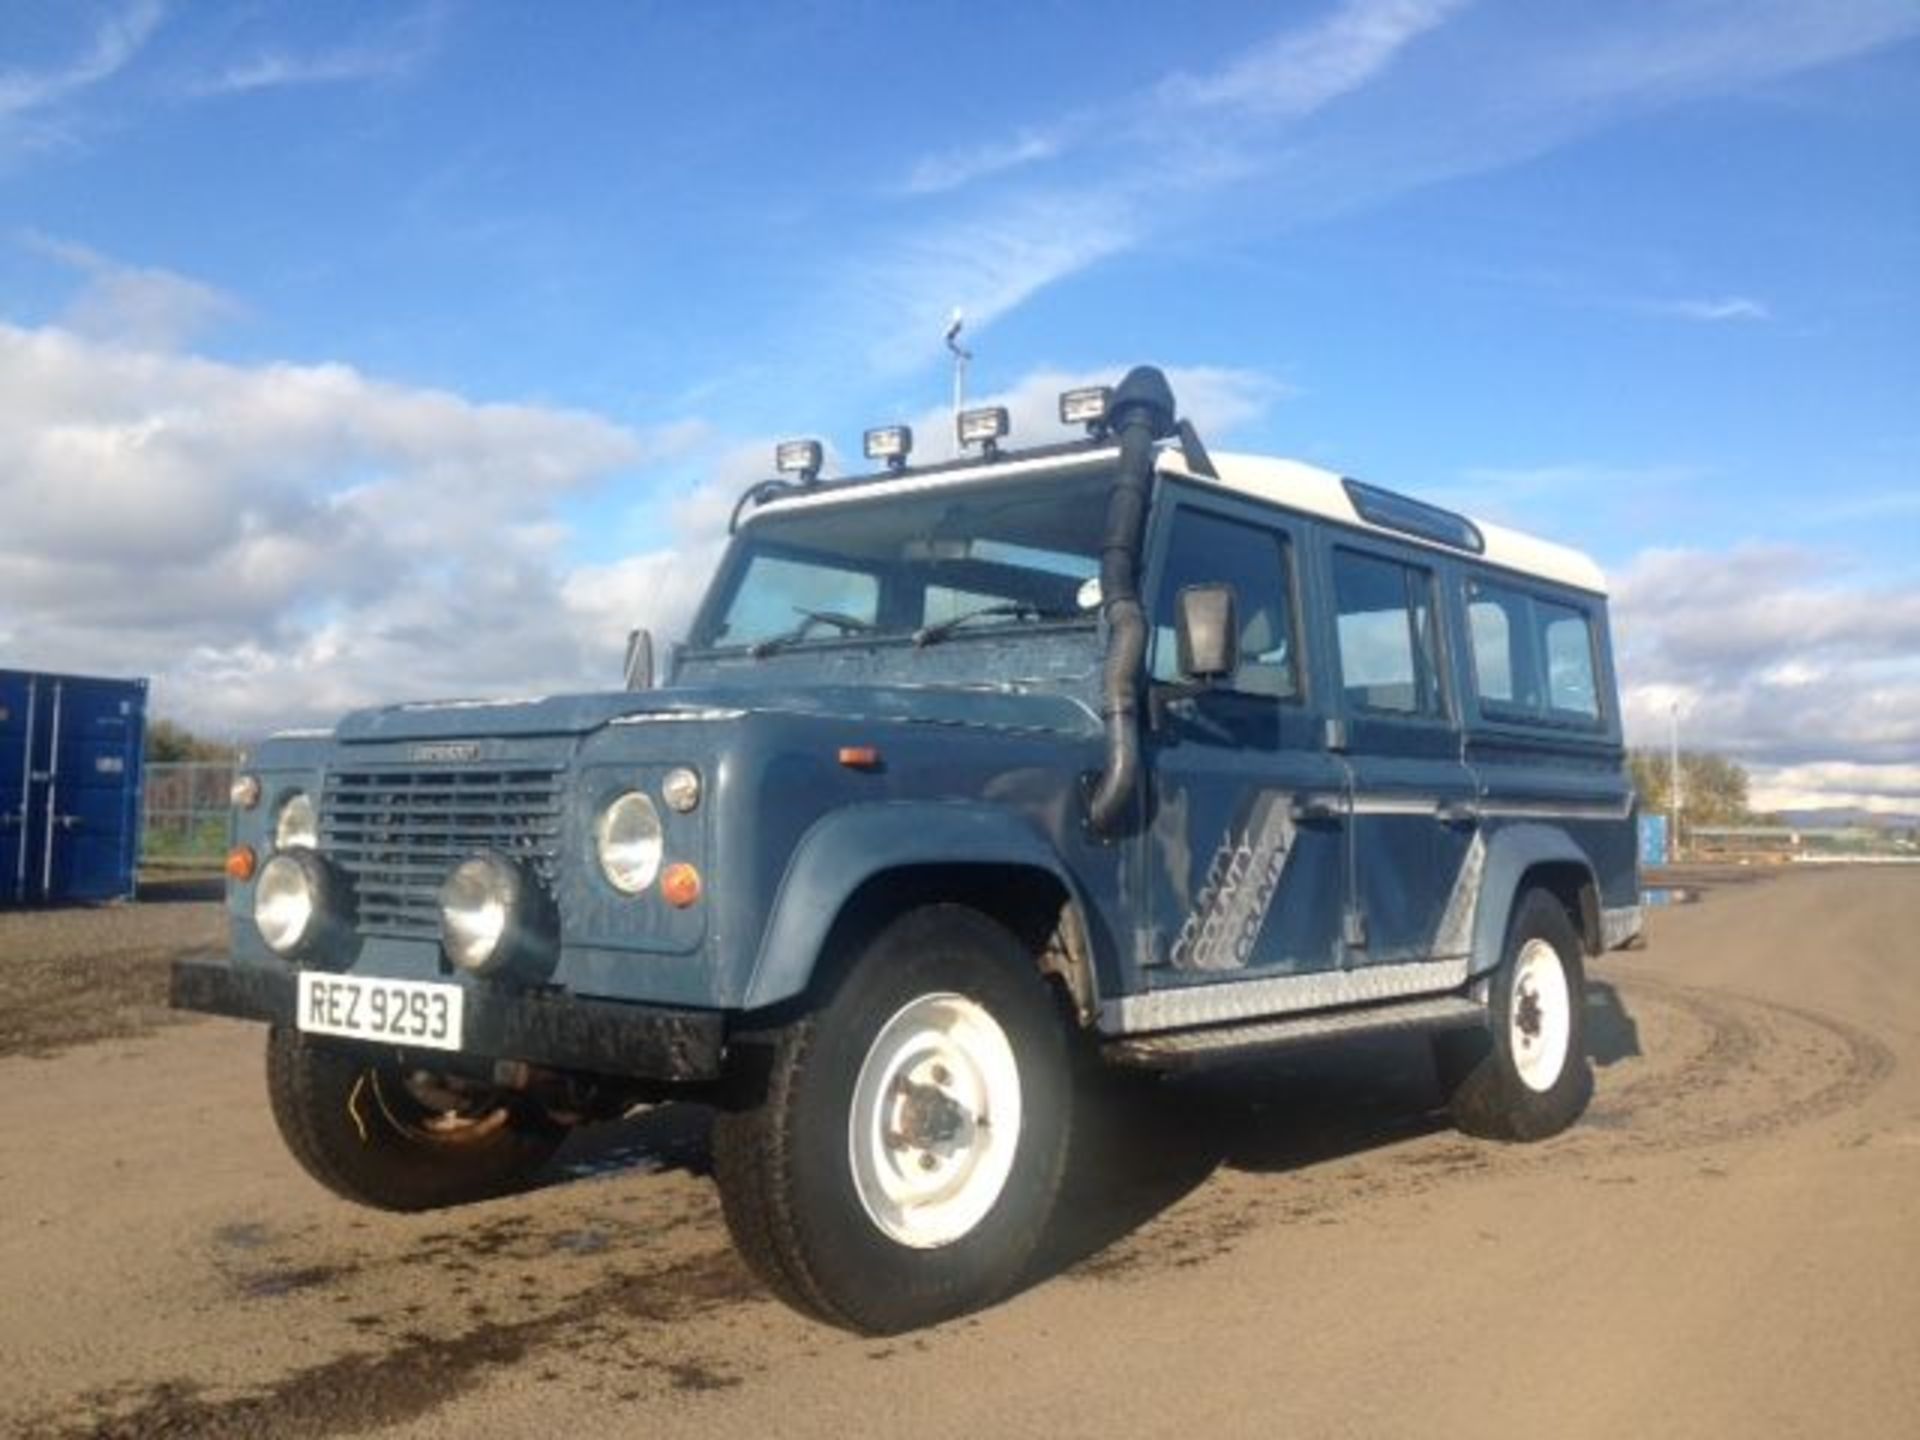 LAND ROVER 110 4C COUNTY D TURBO - 2495cc - Image 2 of 8